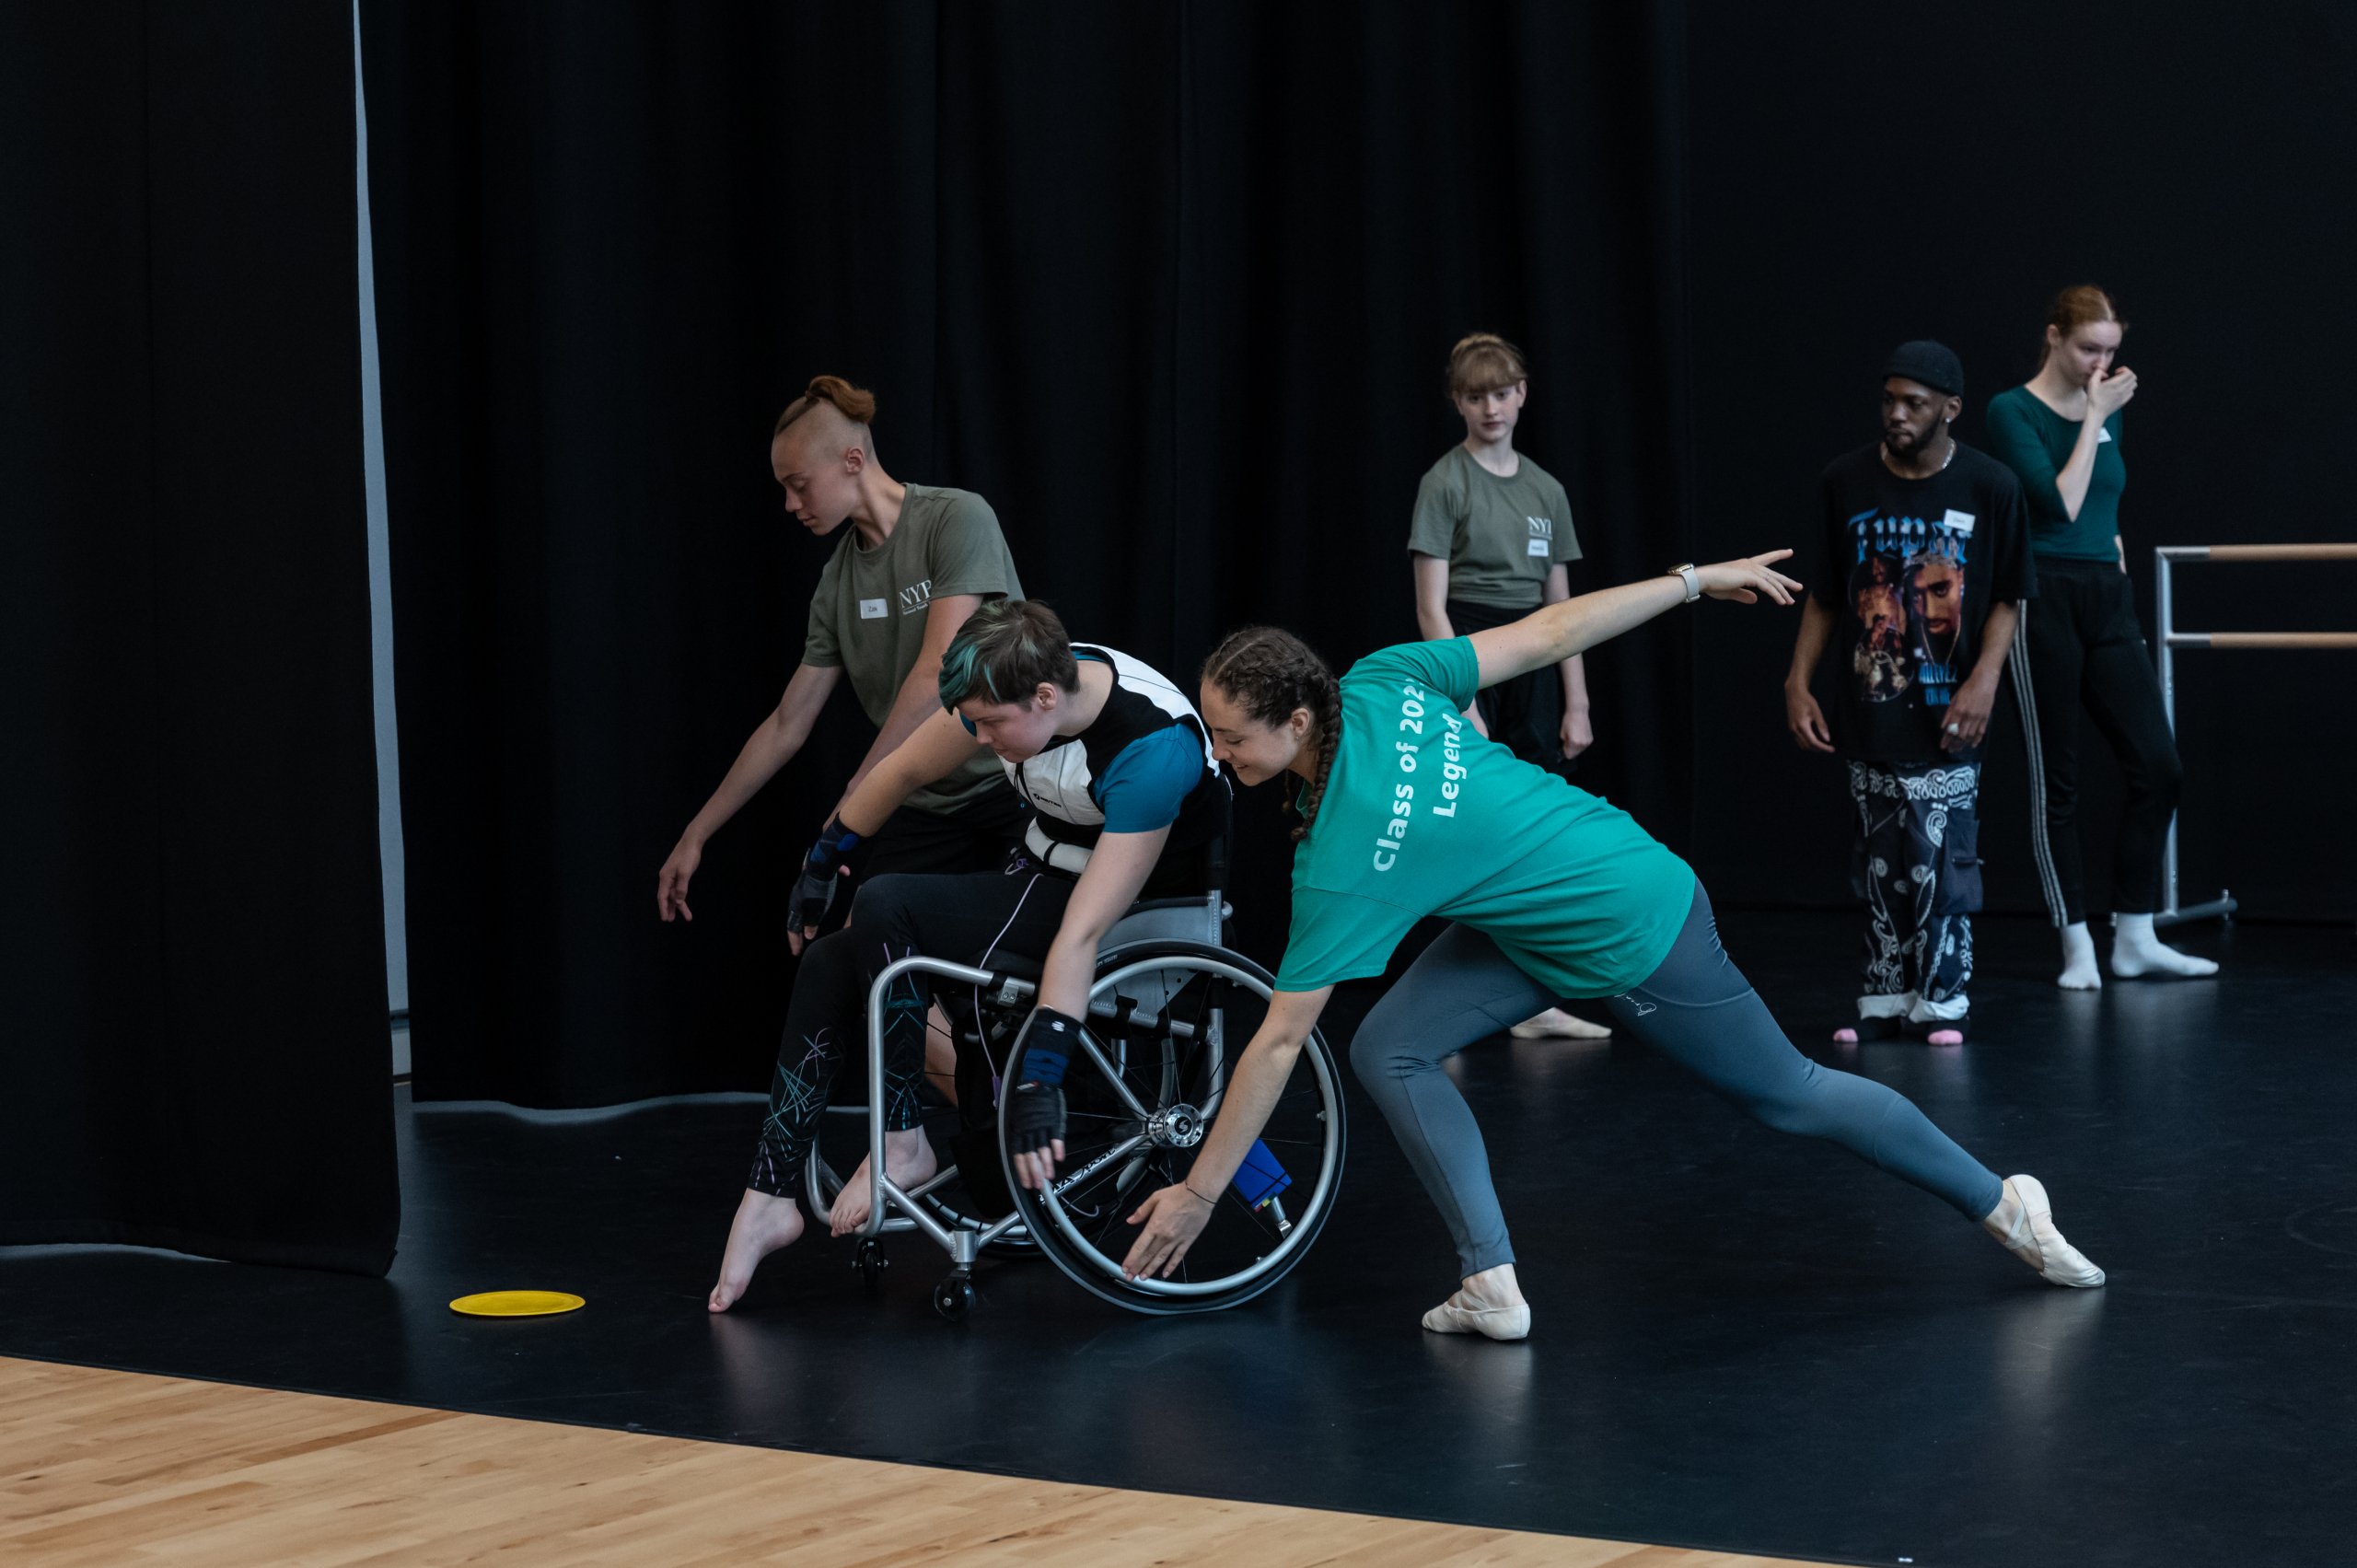 One dancer reaching arms diagonally low next to a dancer in a wheelchair reaching forwards and low next to another dancer lunging with arms extending diagonally away from each other. There are 3 people behind observing this. 